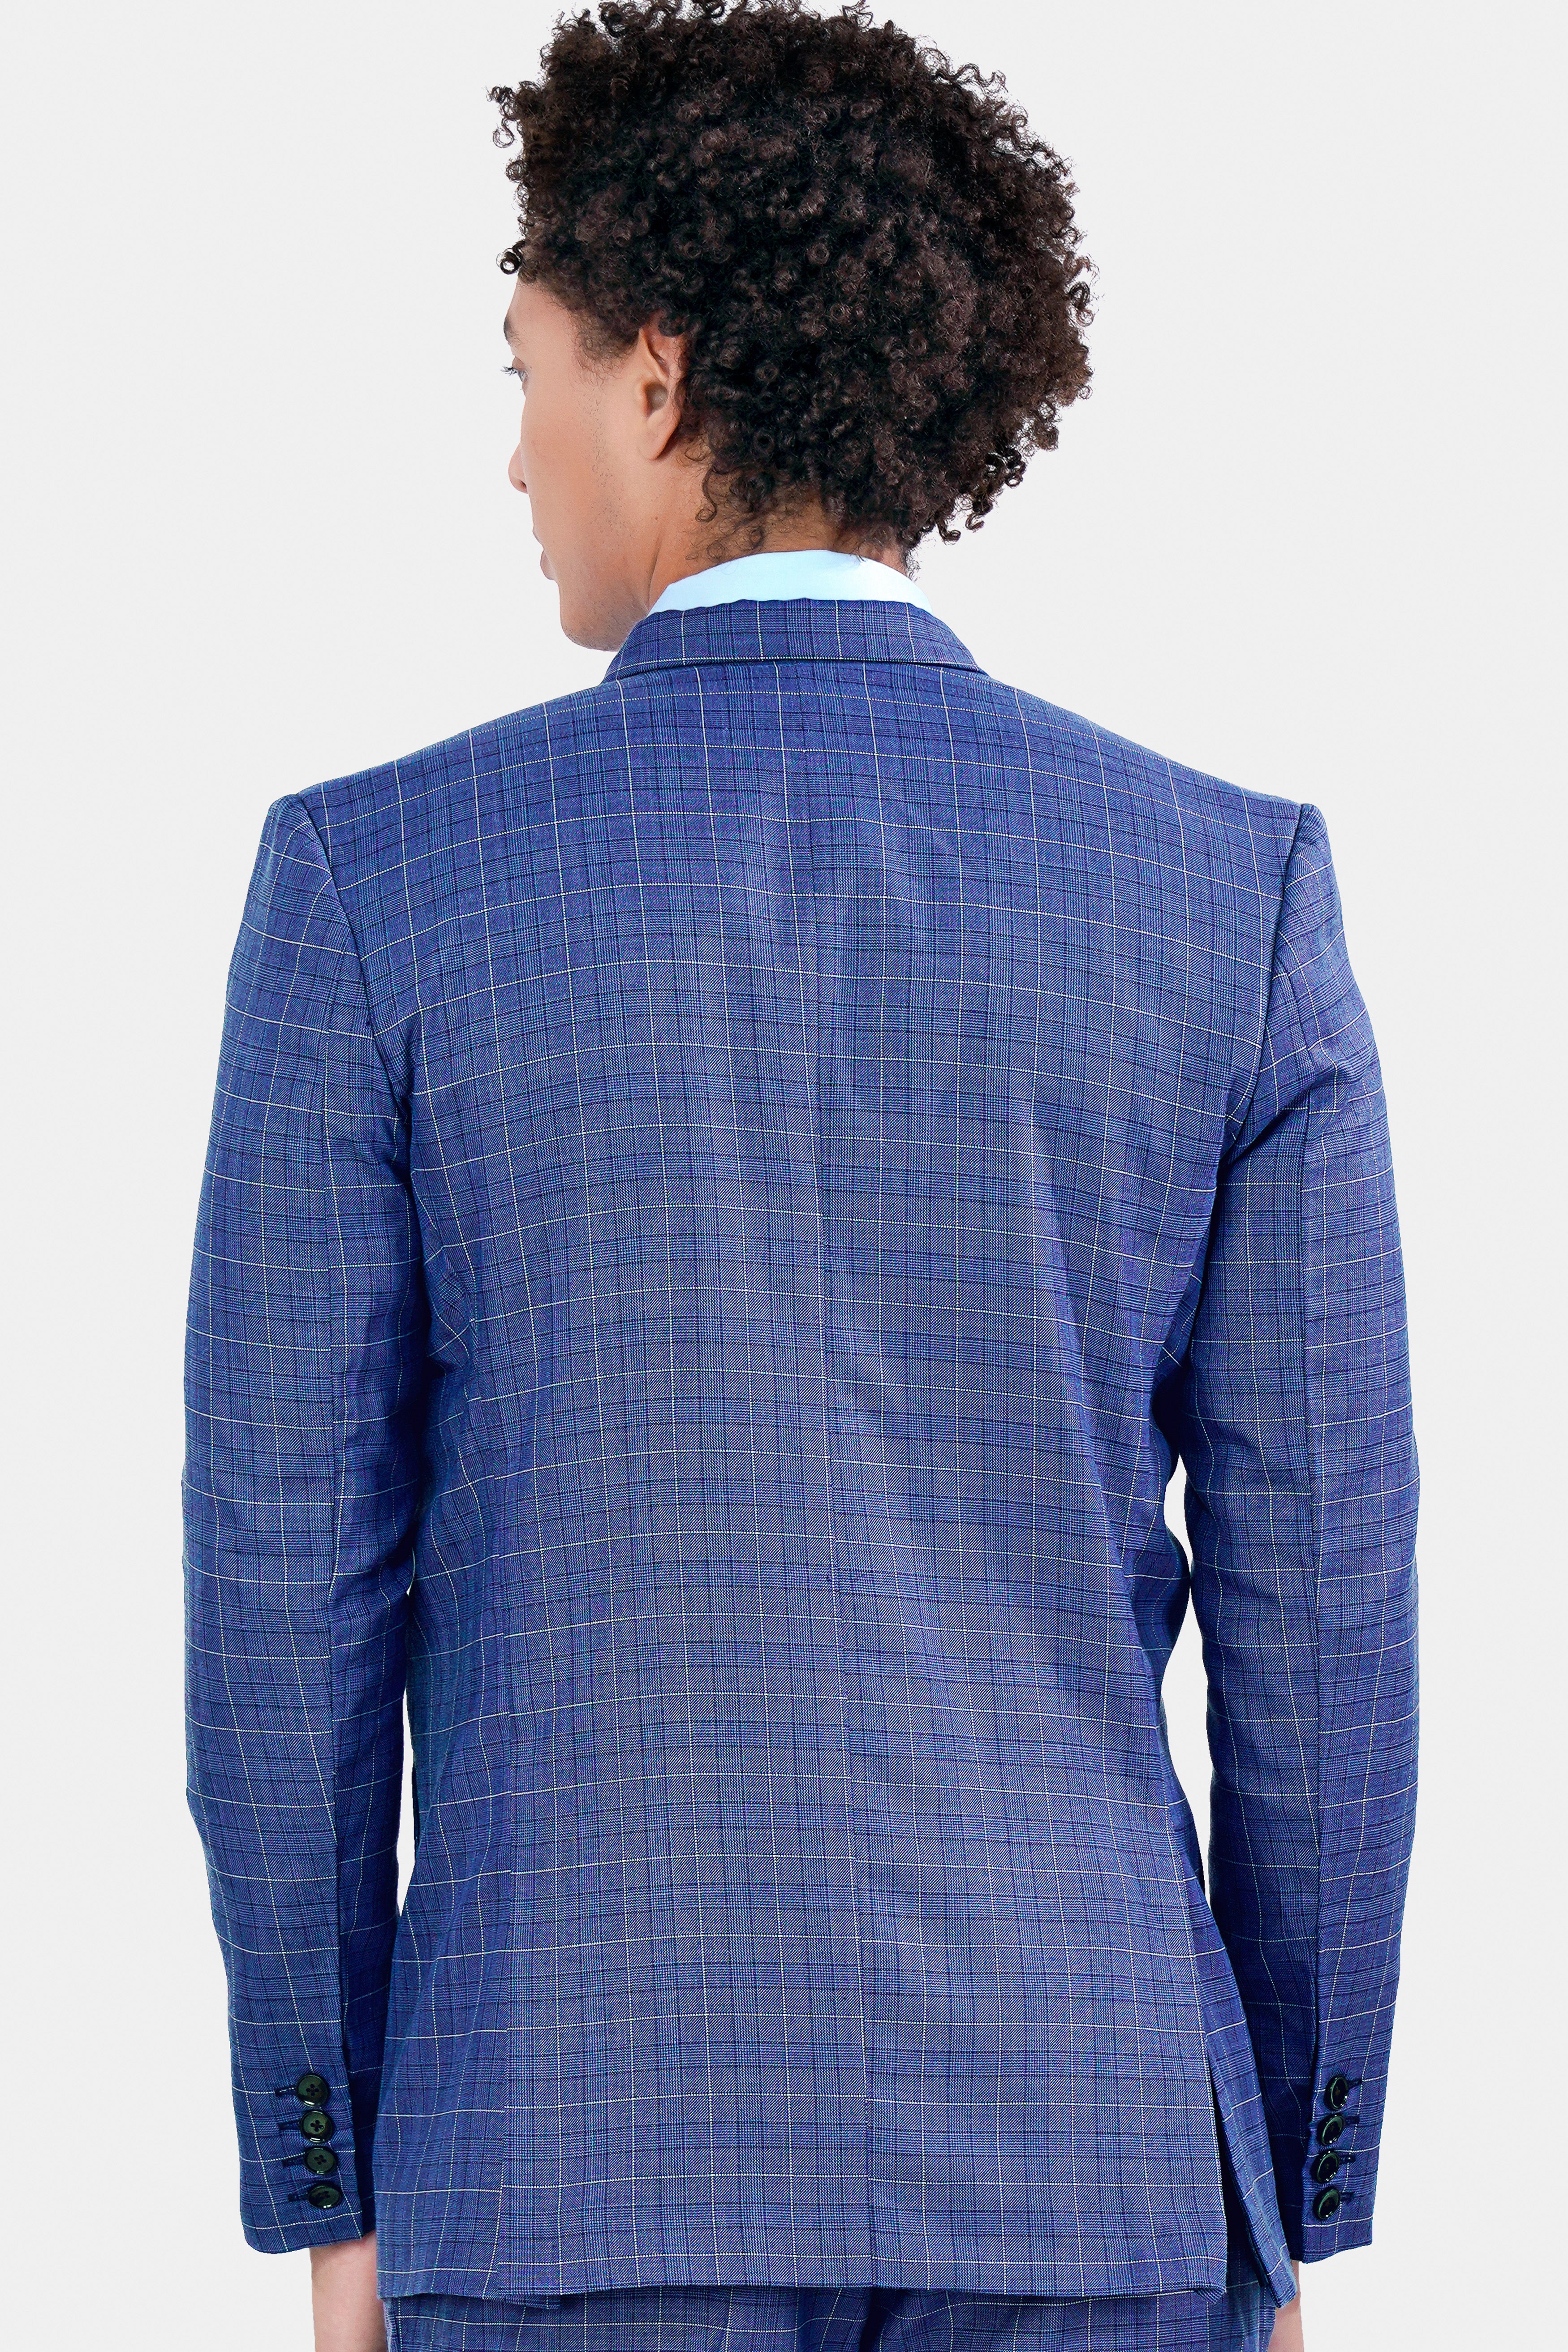 Yonder Blue Plaid Wool Rich Double Breasted Blazer BL2944-DB-36, BL2944-DB-38, BL2944-DB-40, BL2944-DB-42, BL2944-DB-44, BL2944-DB-46, BL2944-DB-48, BL2944-DB-50, BL2944-DB-52, BL2944-DB-54, BL2944-DB-56, BL2944-DB-58, BL2944-DB-60